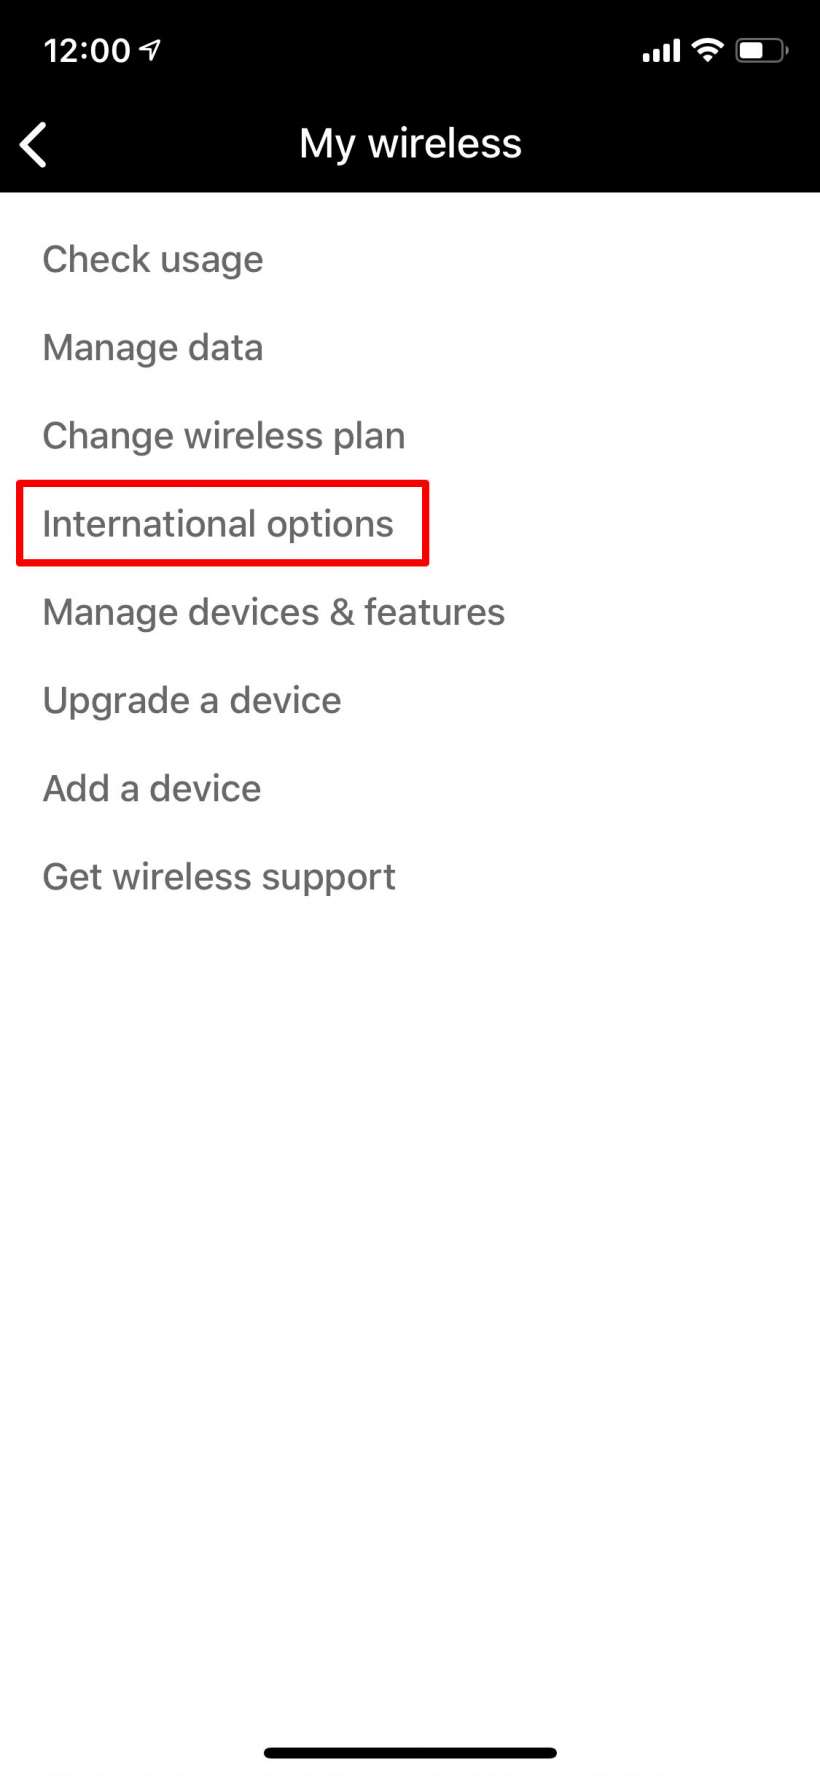 How to use AT&T Passport for international travel on iPhone.